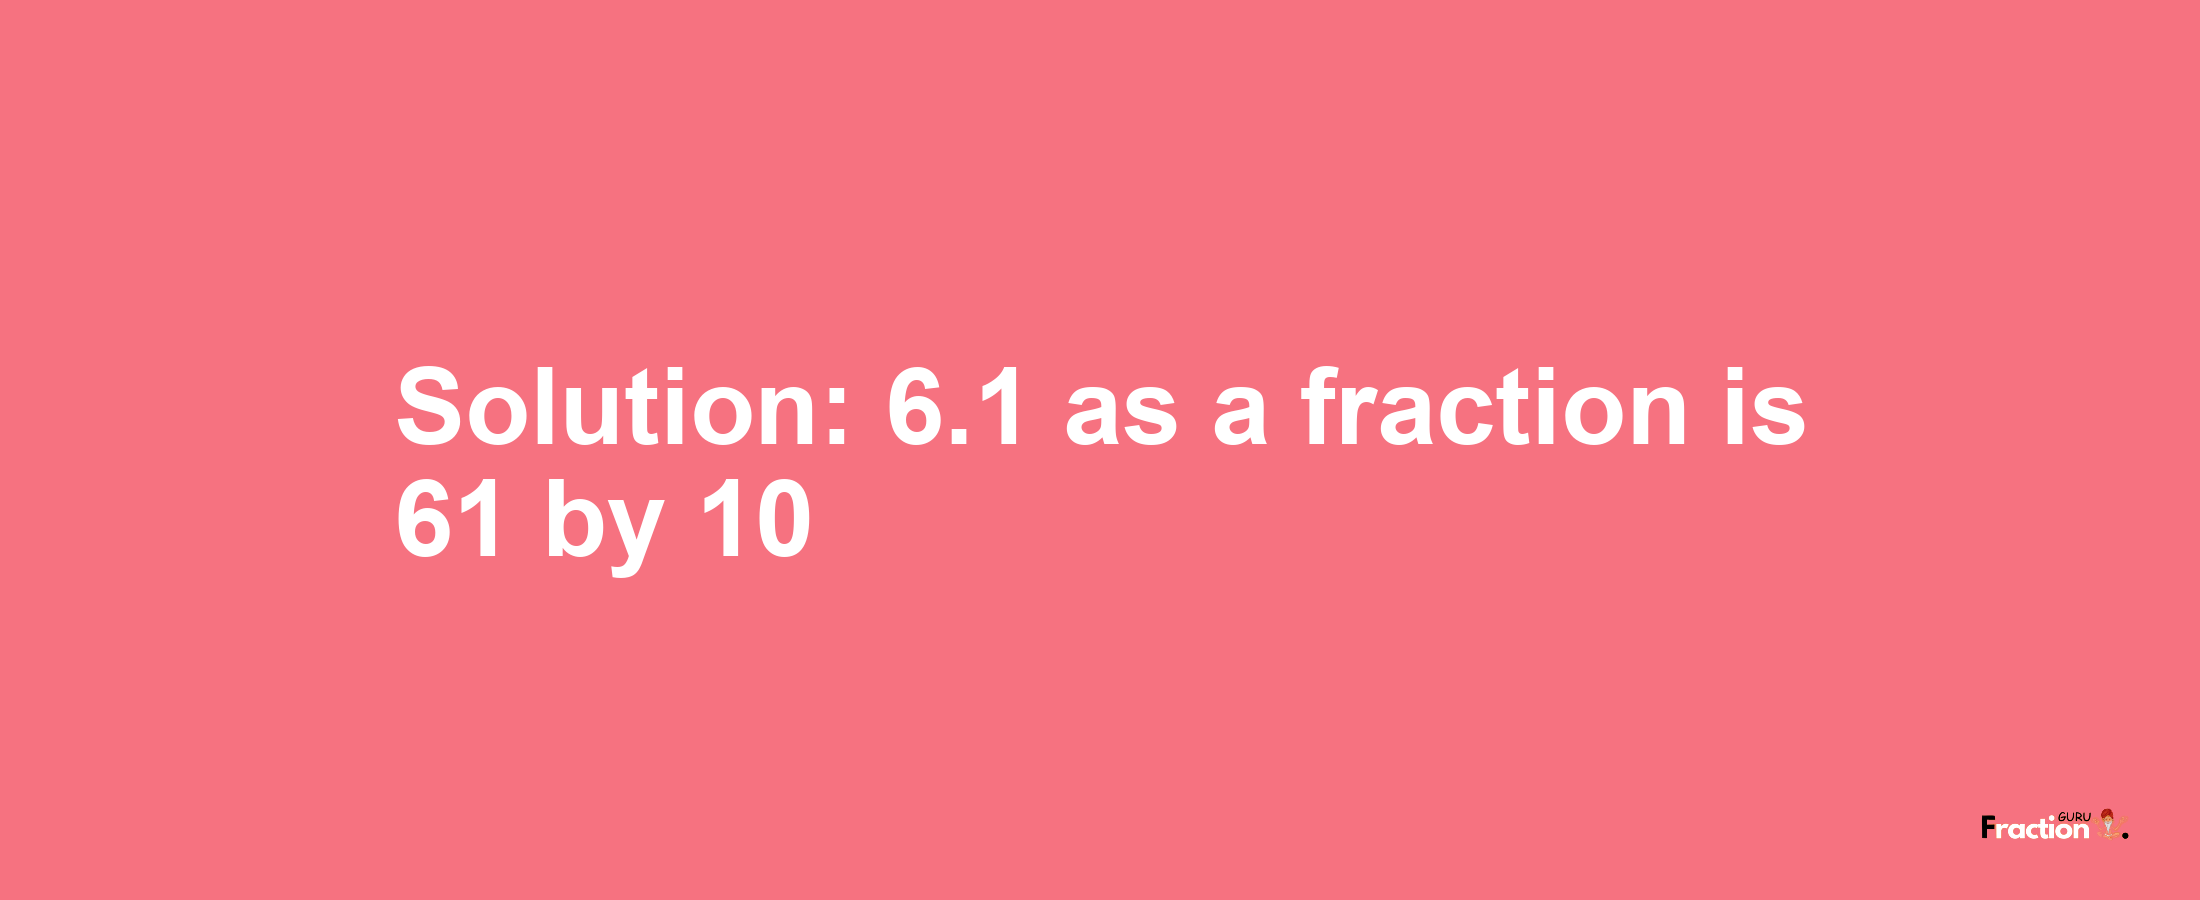 Solution:6.1 as a fraction is 61/10